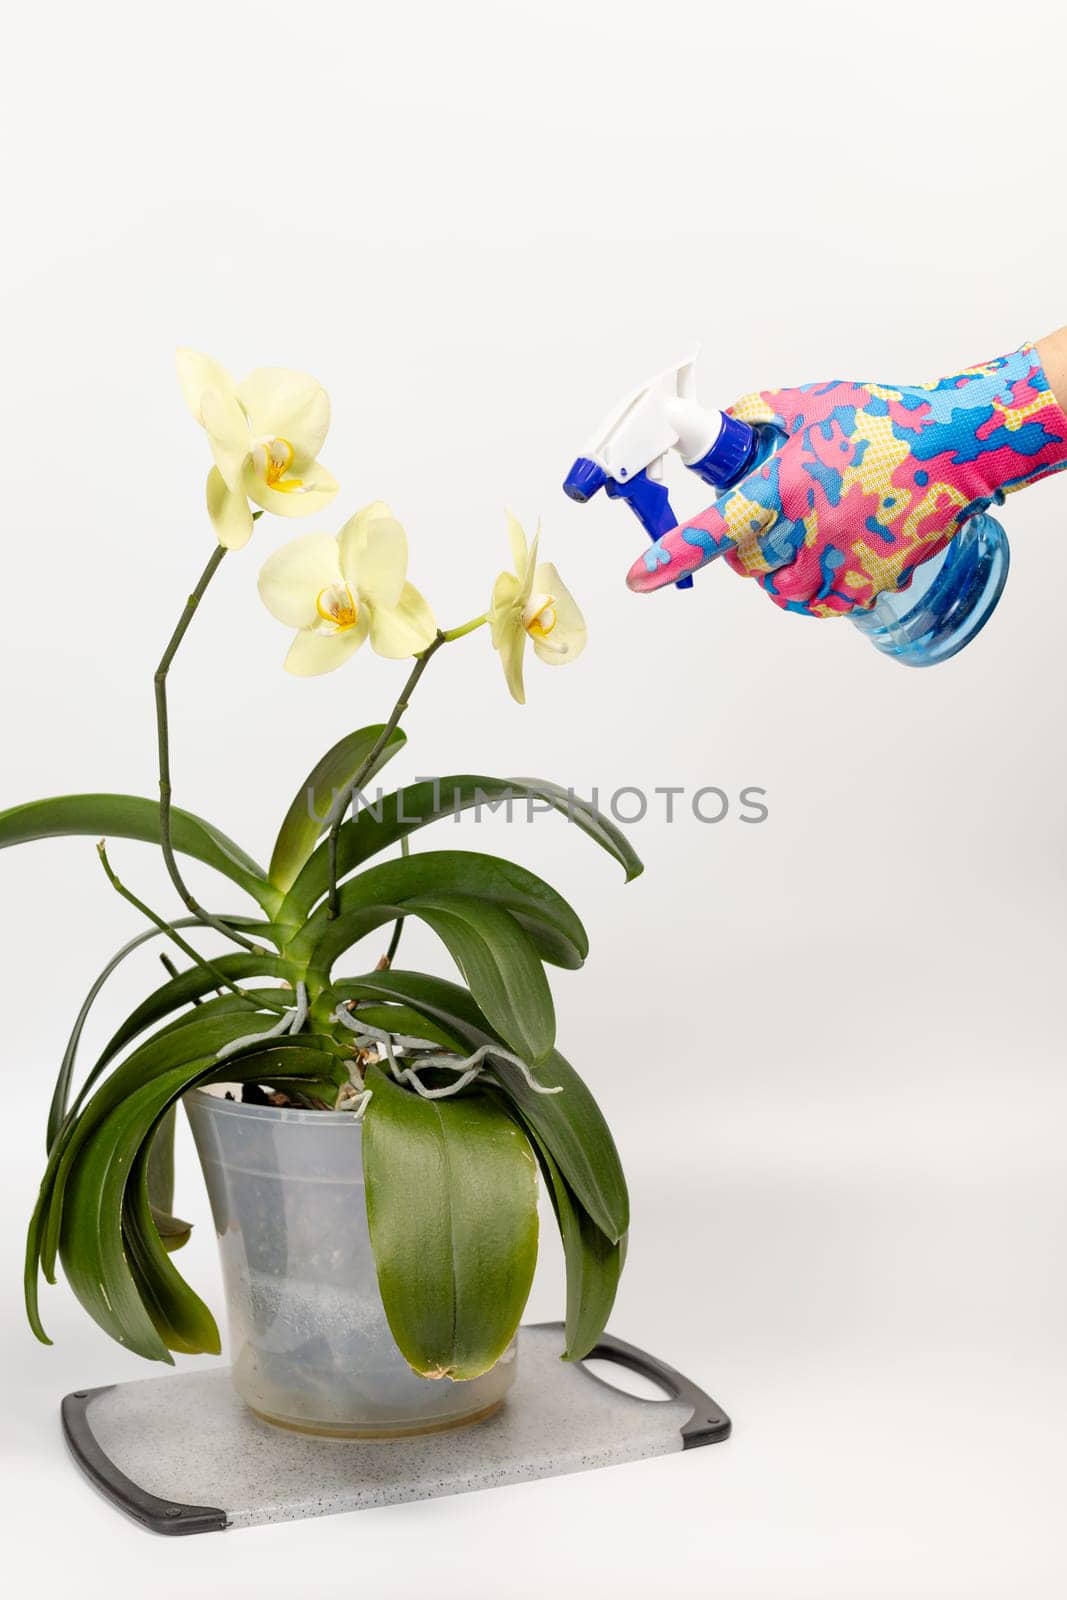 Woman sprays orchids in flower pot. Taking care for house plants. by mvg6894